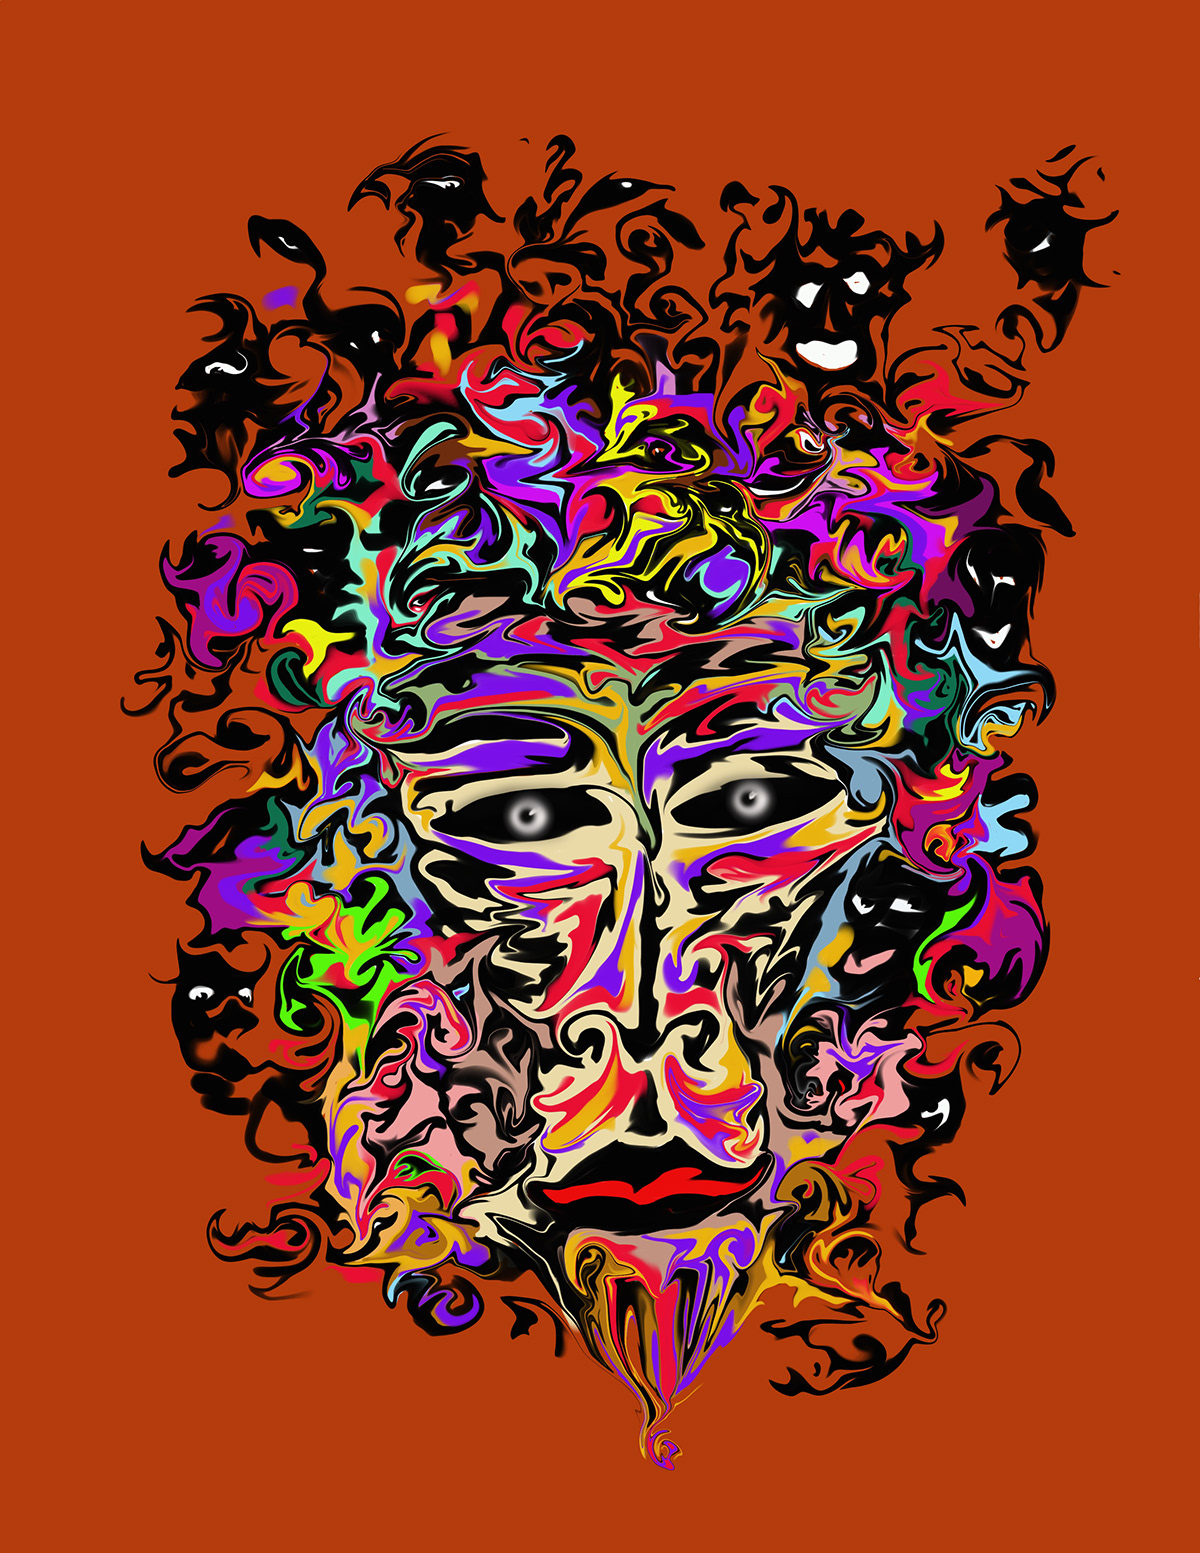 nightmares deamons fantasy faces  Colorful abstract